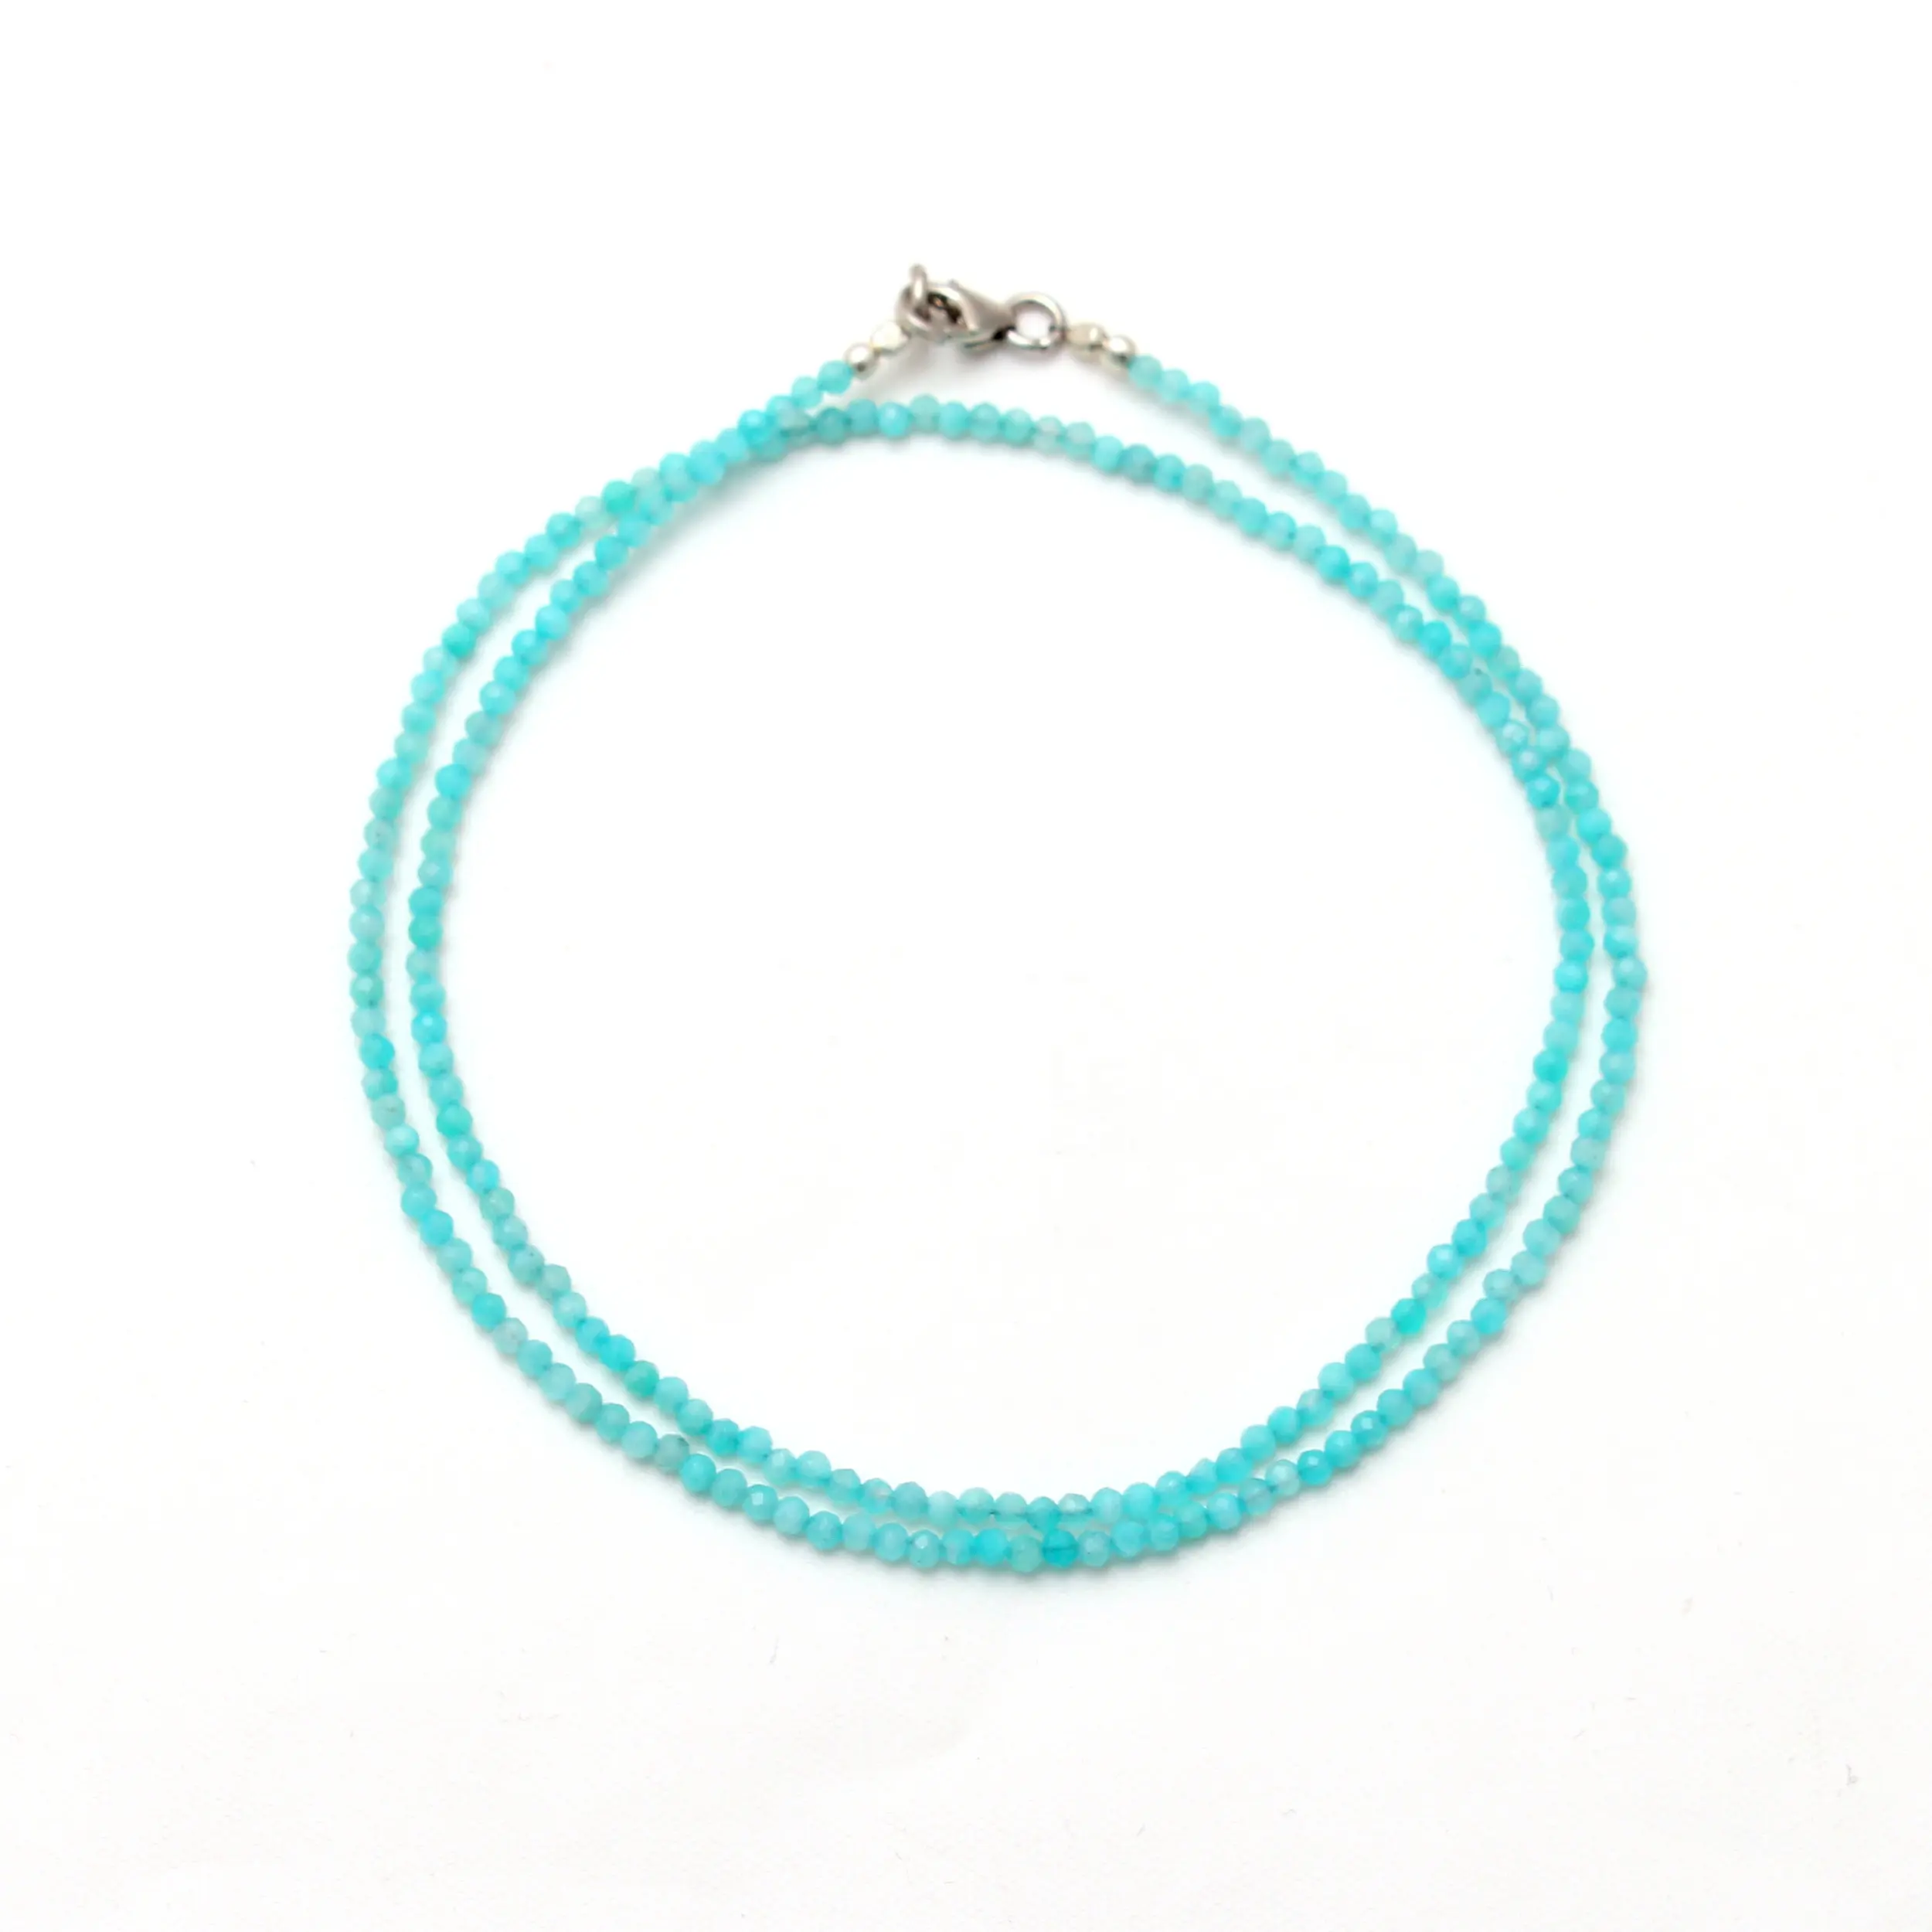 2mm Micro Faceted Green Amazonite Beaded Necklace, Sterling Silver/Rose Gold/Gold Lock Necklace Jewelry